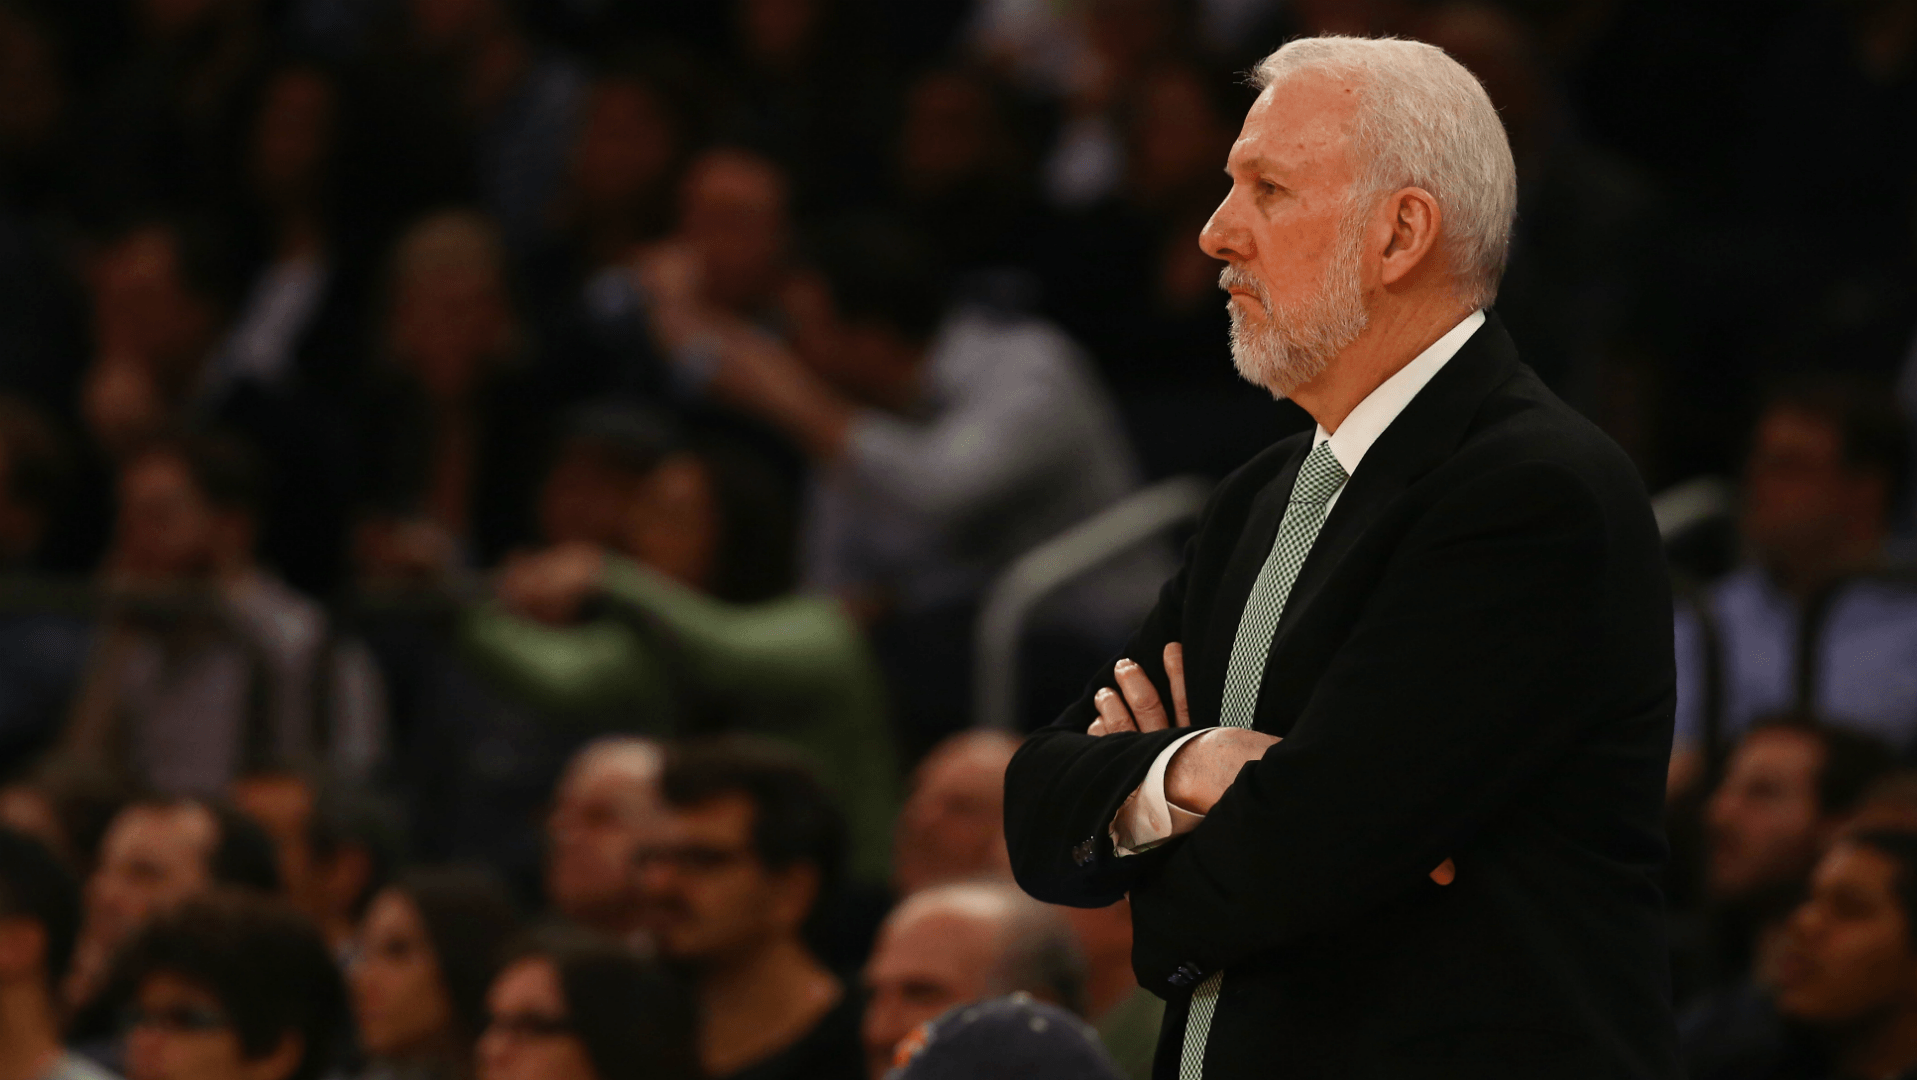 Spurs' Gregg Popovich after crushing Thunder: 'Not a fair fight